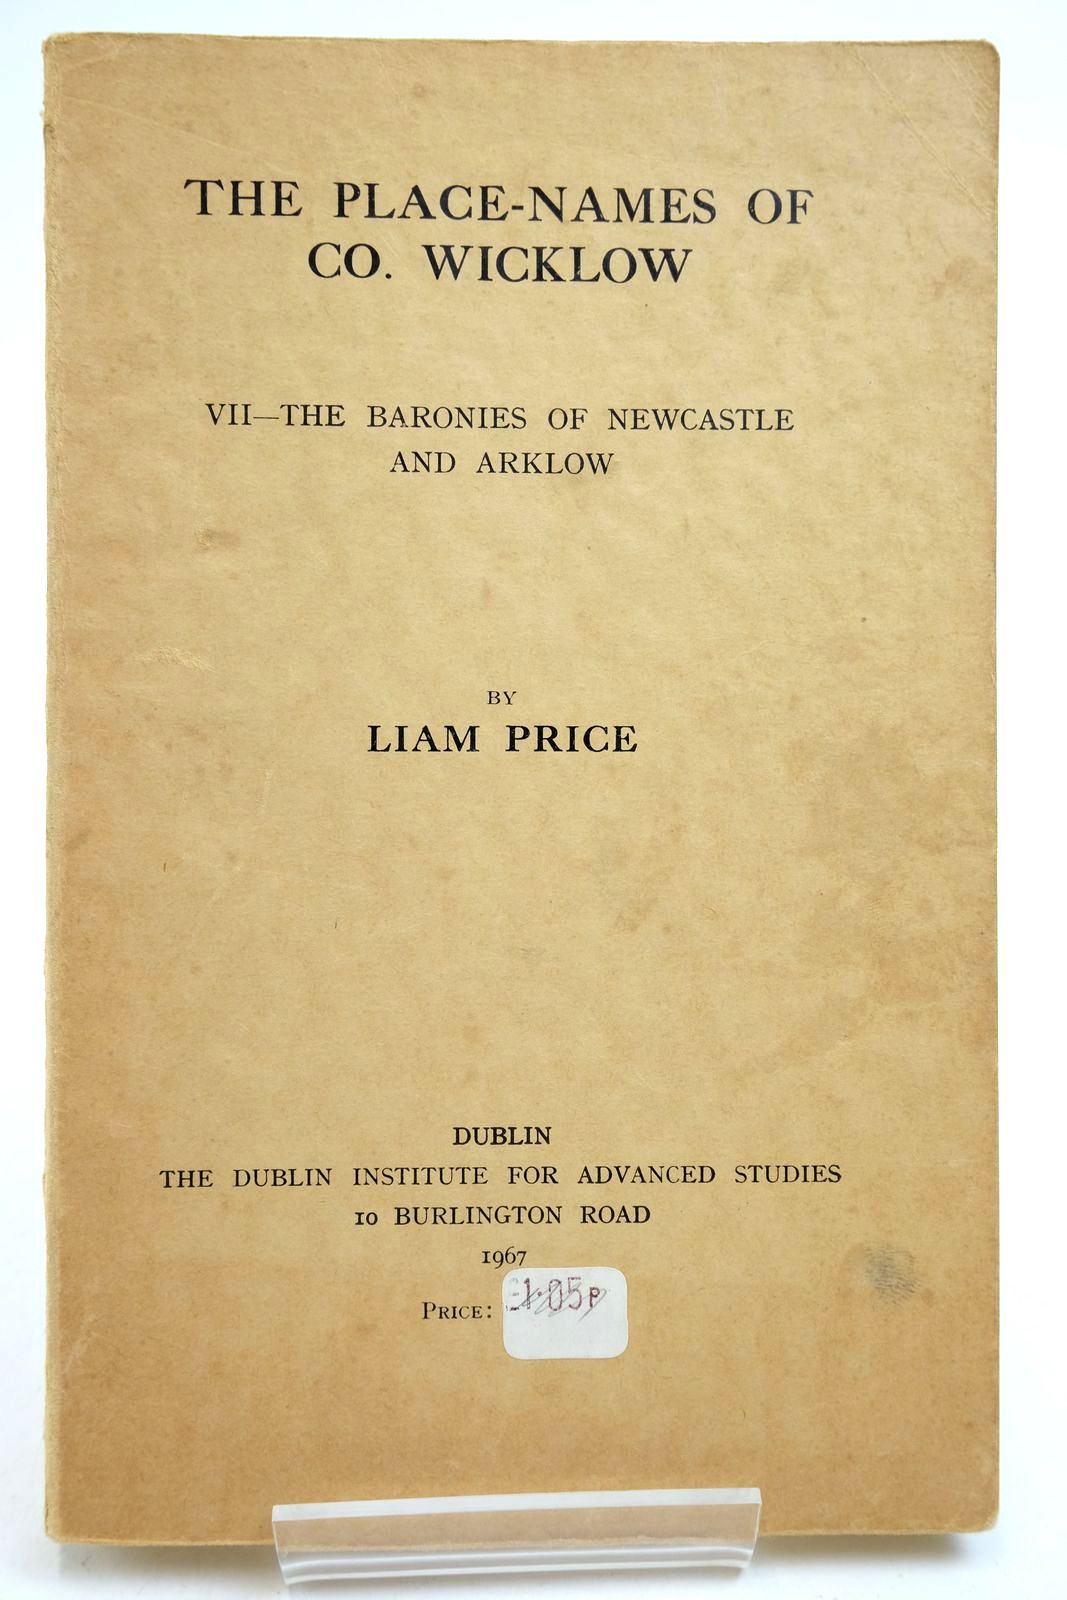 Photo of THE PLACE-NAMES OF CO. WICKLOW: VII - THE BARONIES OF NEWCASTLE AND ARKLOW written by Price, Liam published by The Dublin Institute For Advanced Studies (STOCK CODE: 2140631)  for sale by Stella & Rose's Books